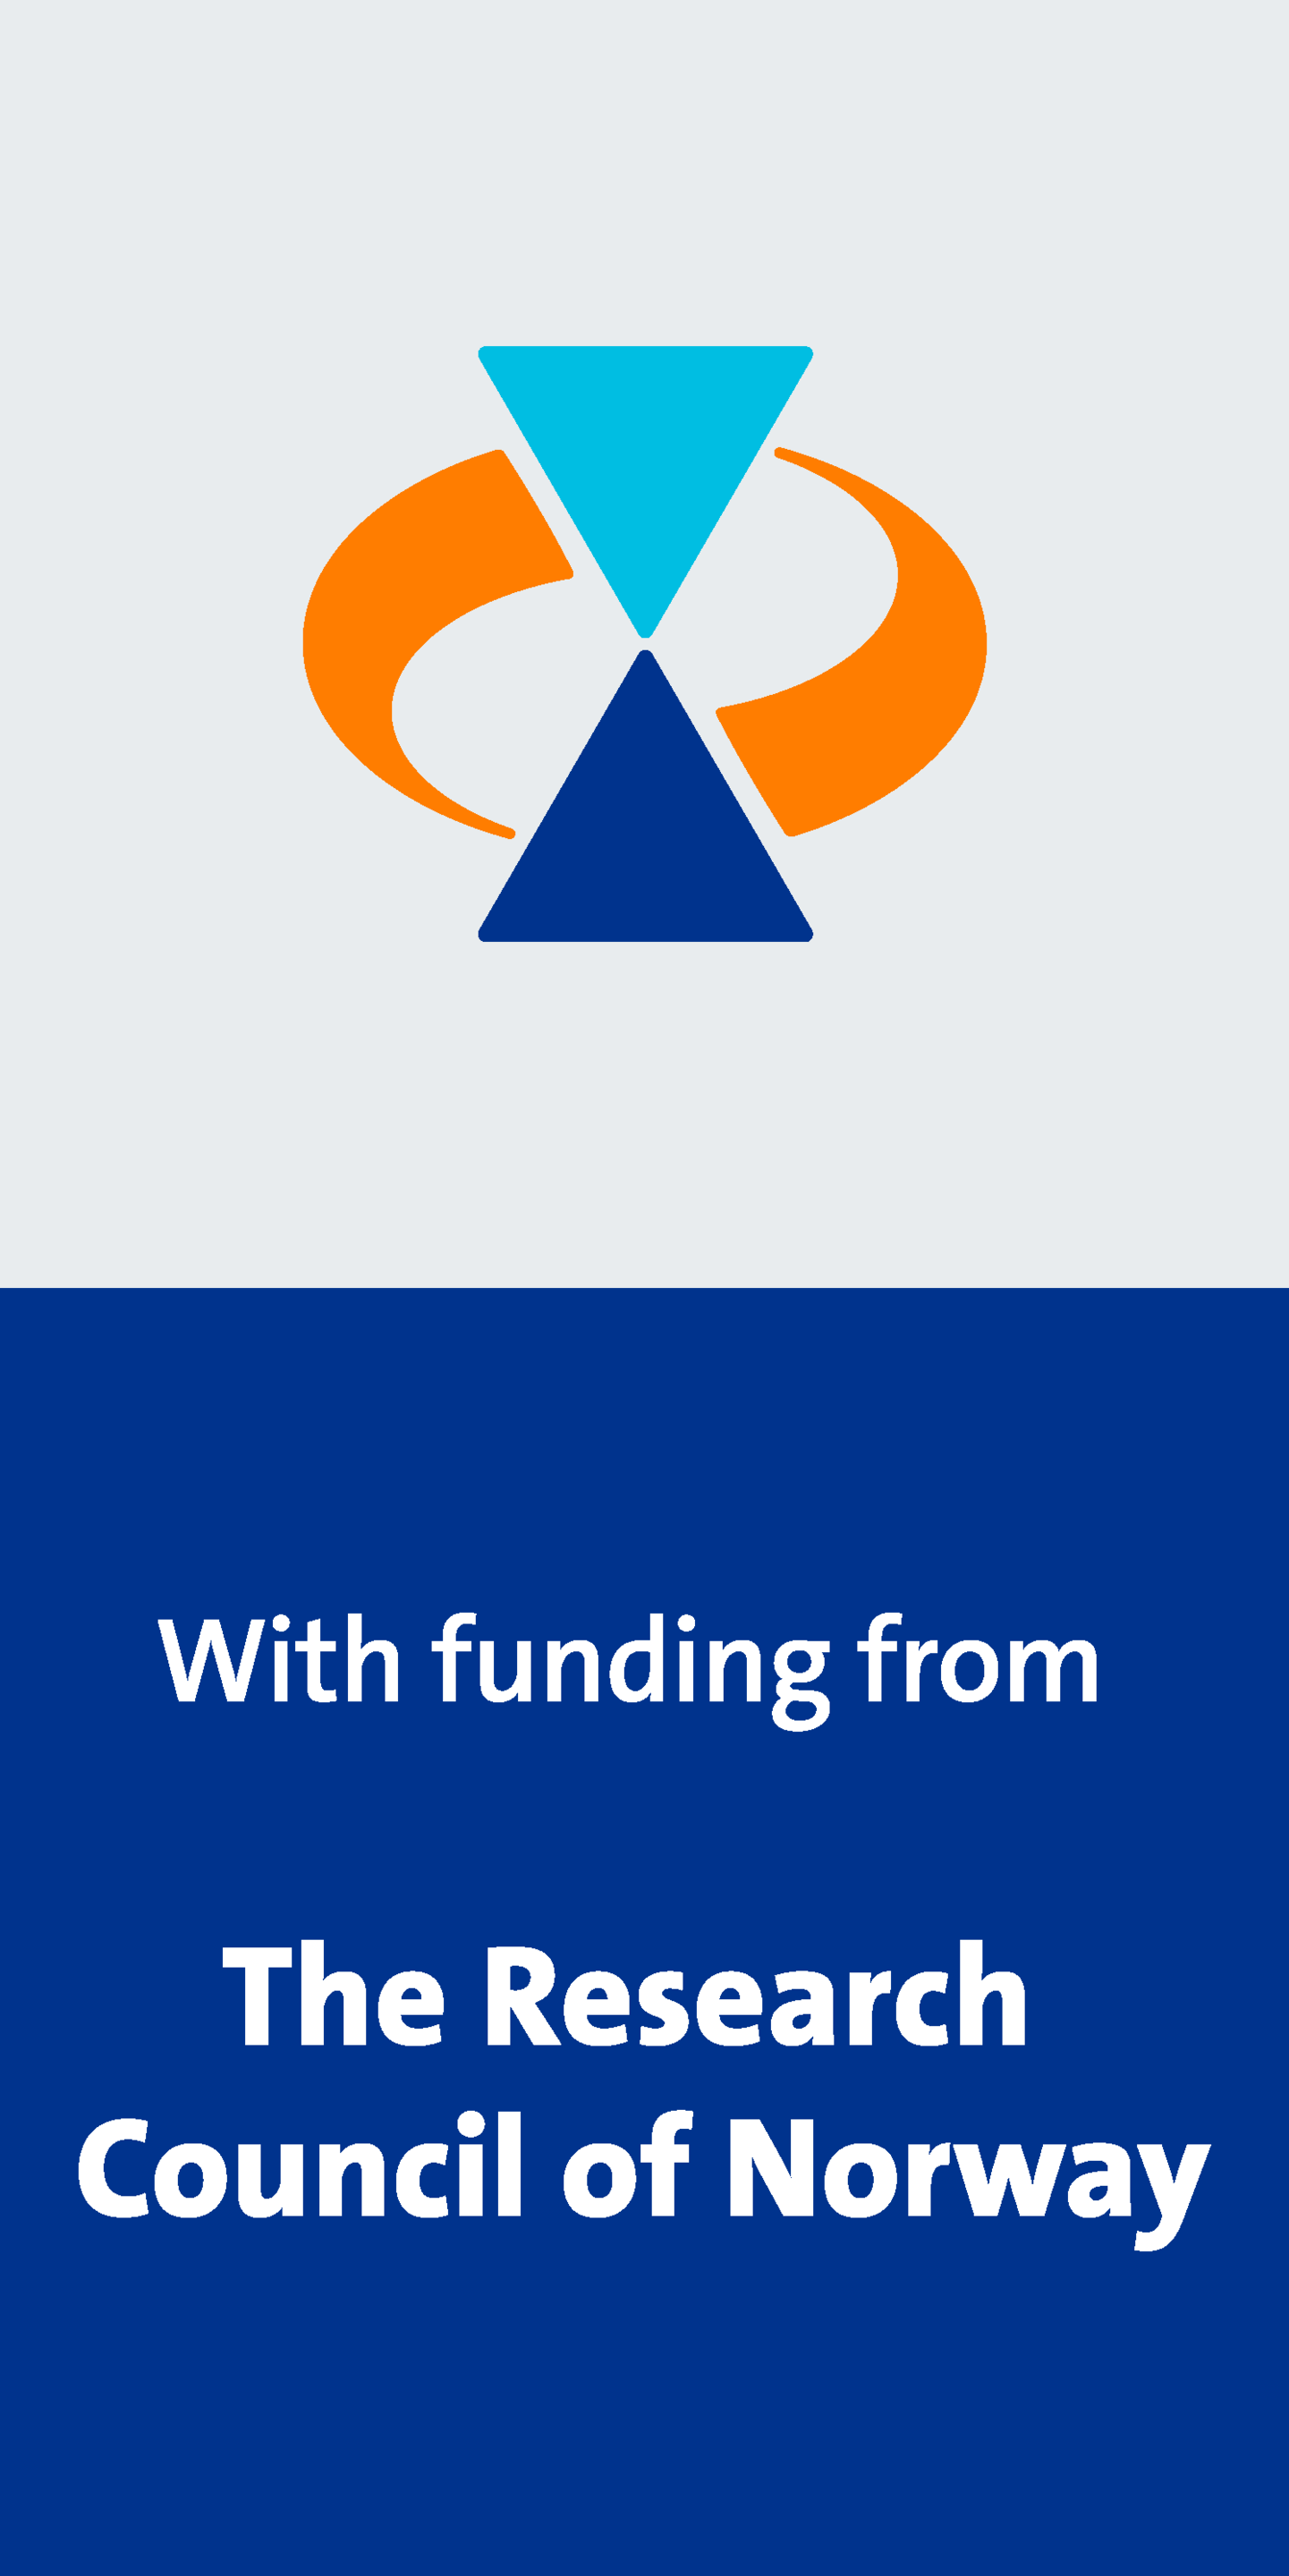 logo: with funding from the Research Council of Norway